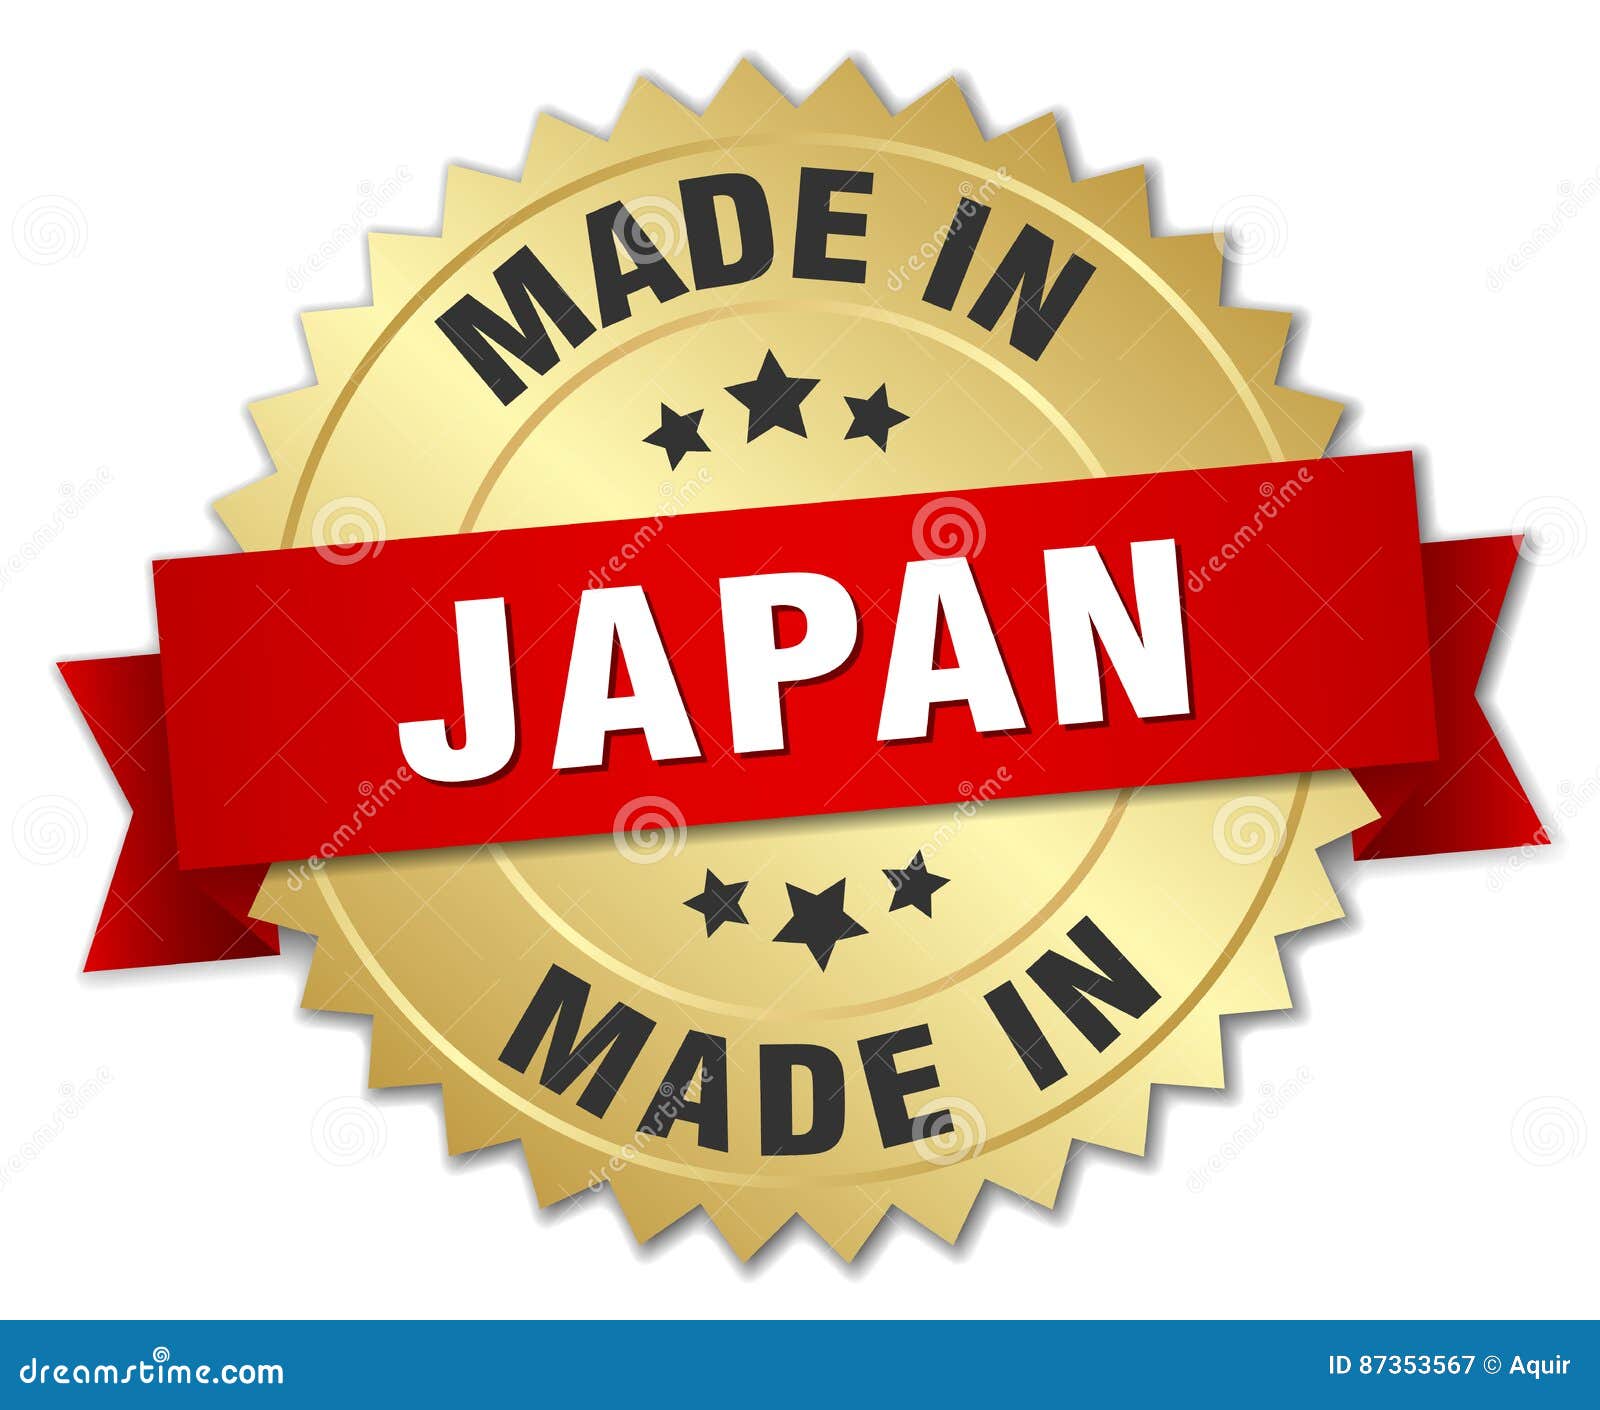 Made in Japan gold badge stock vector. Illustration of crafted - 87353567